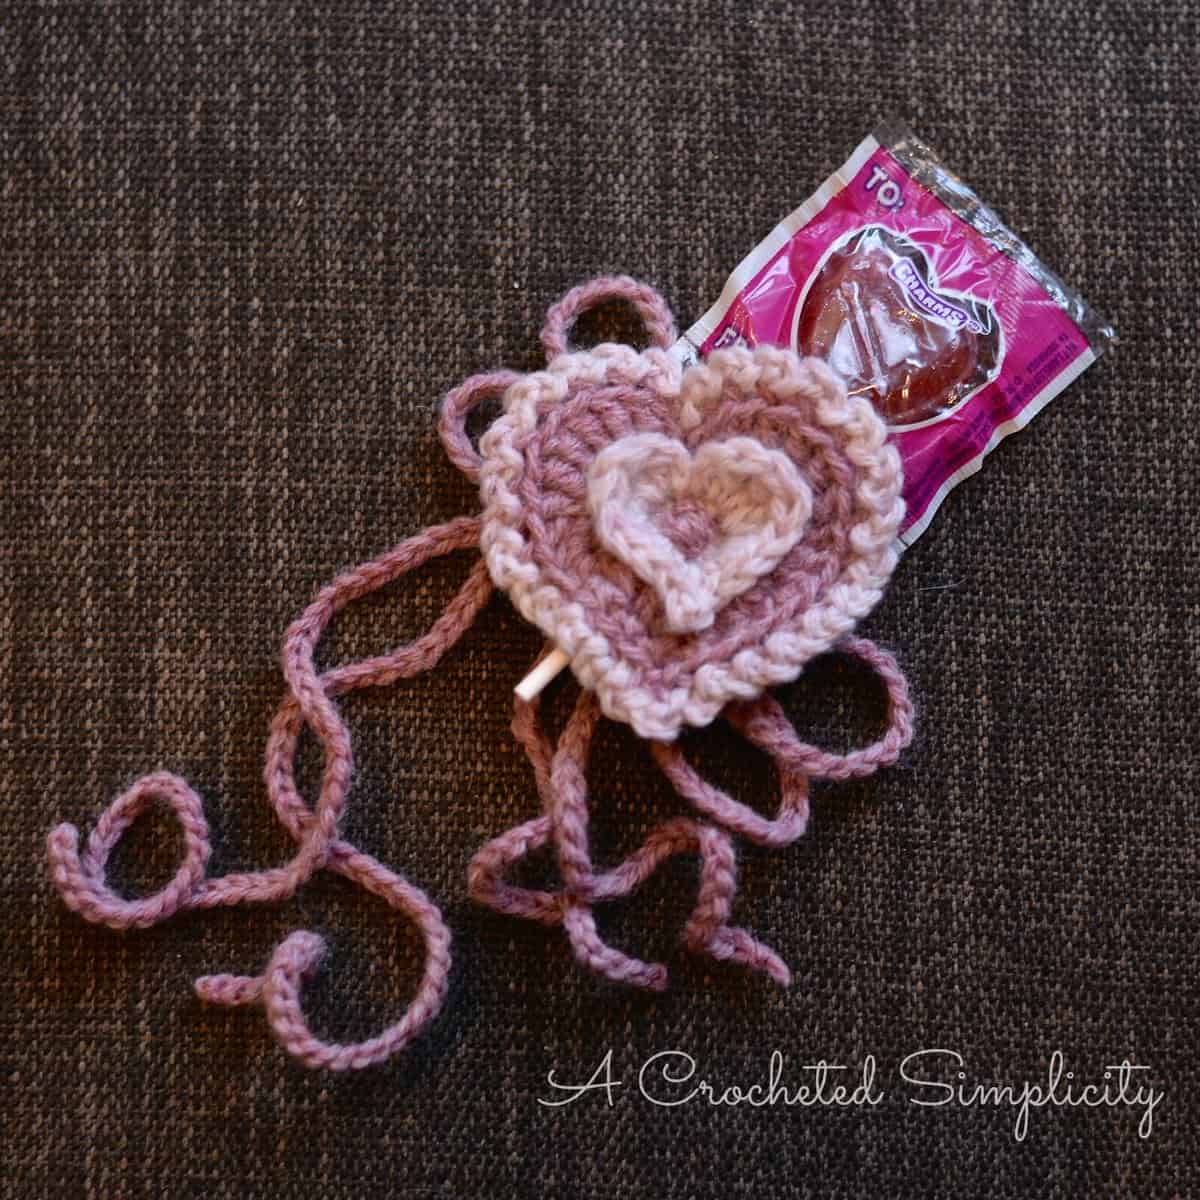 Light and dark pink crocheted heart headband with Valentine's candy.